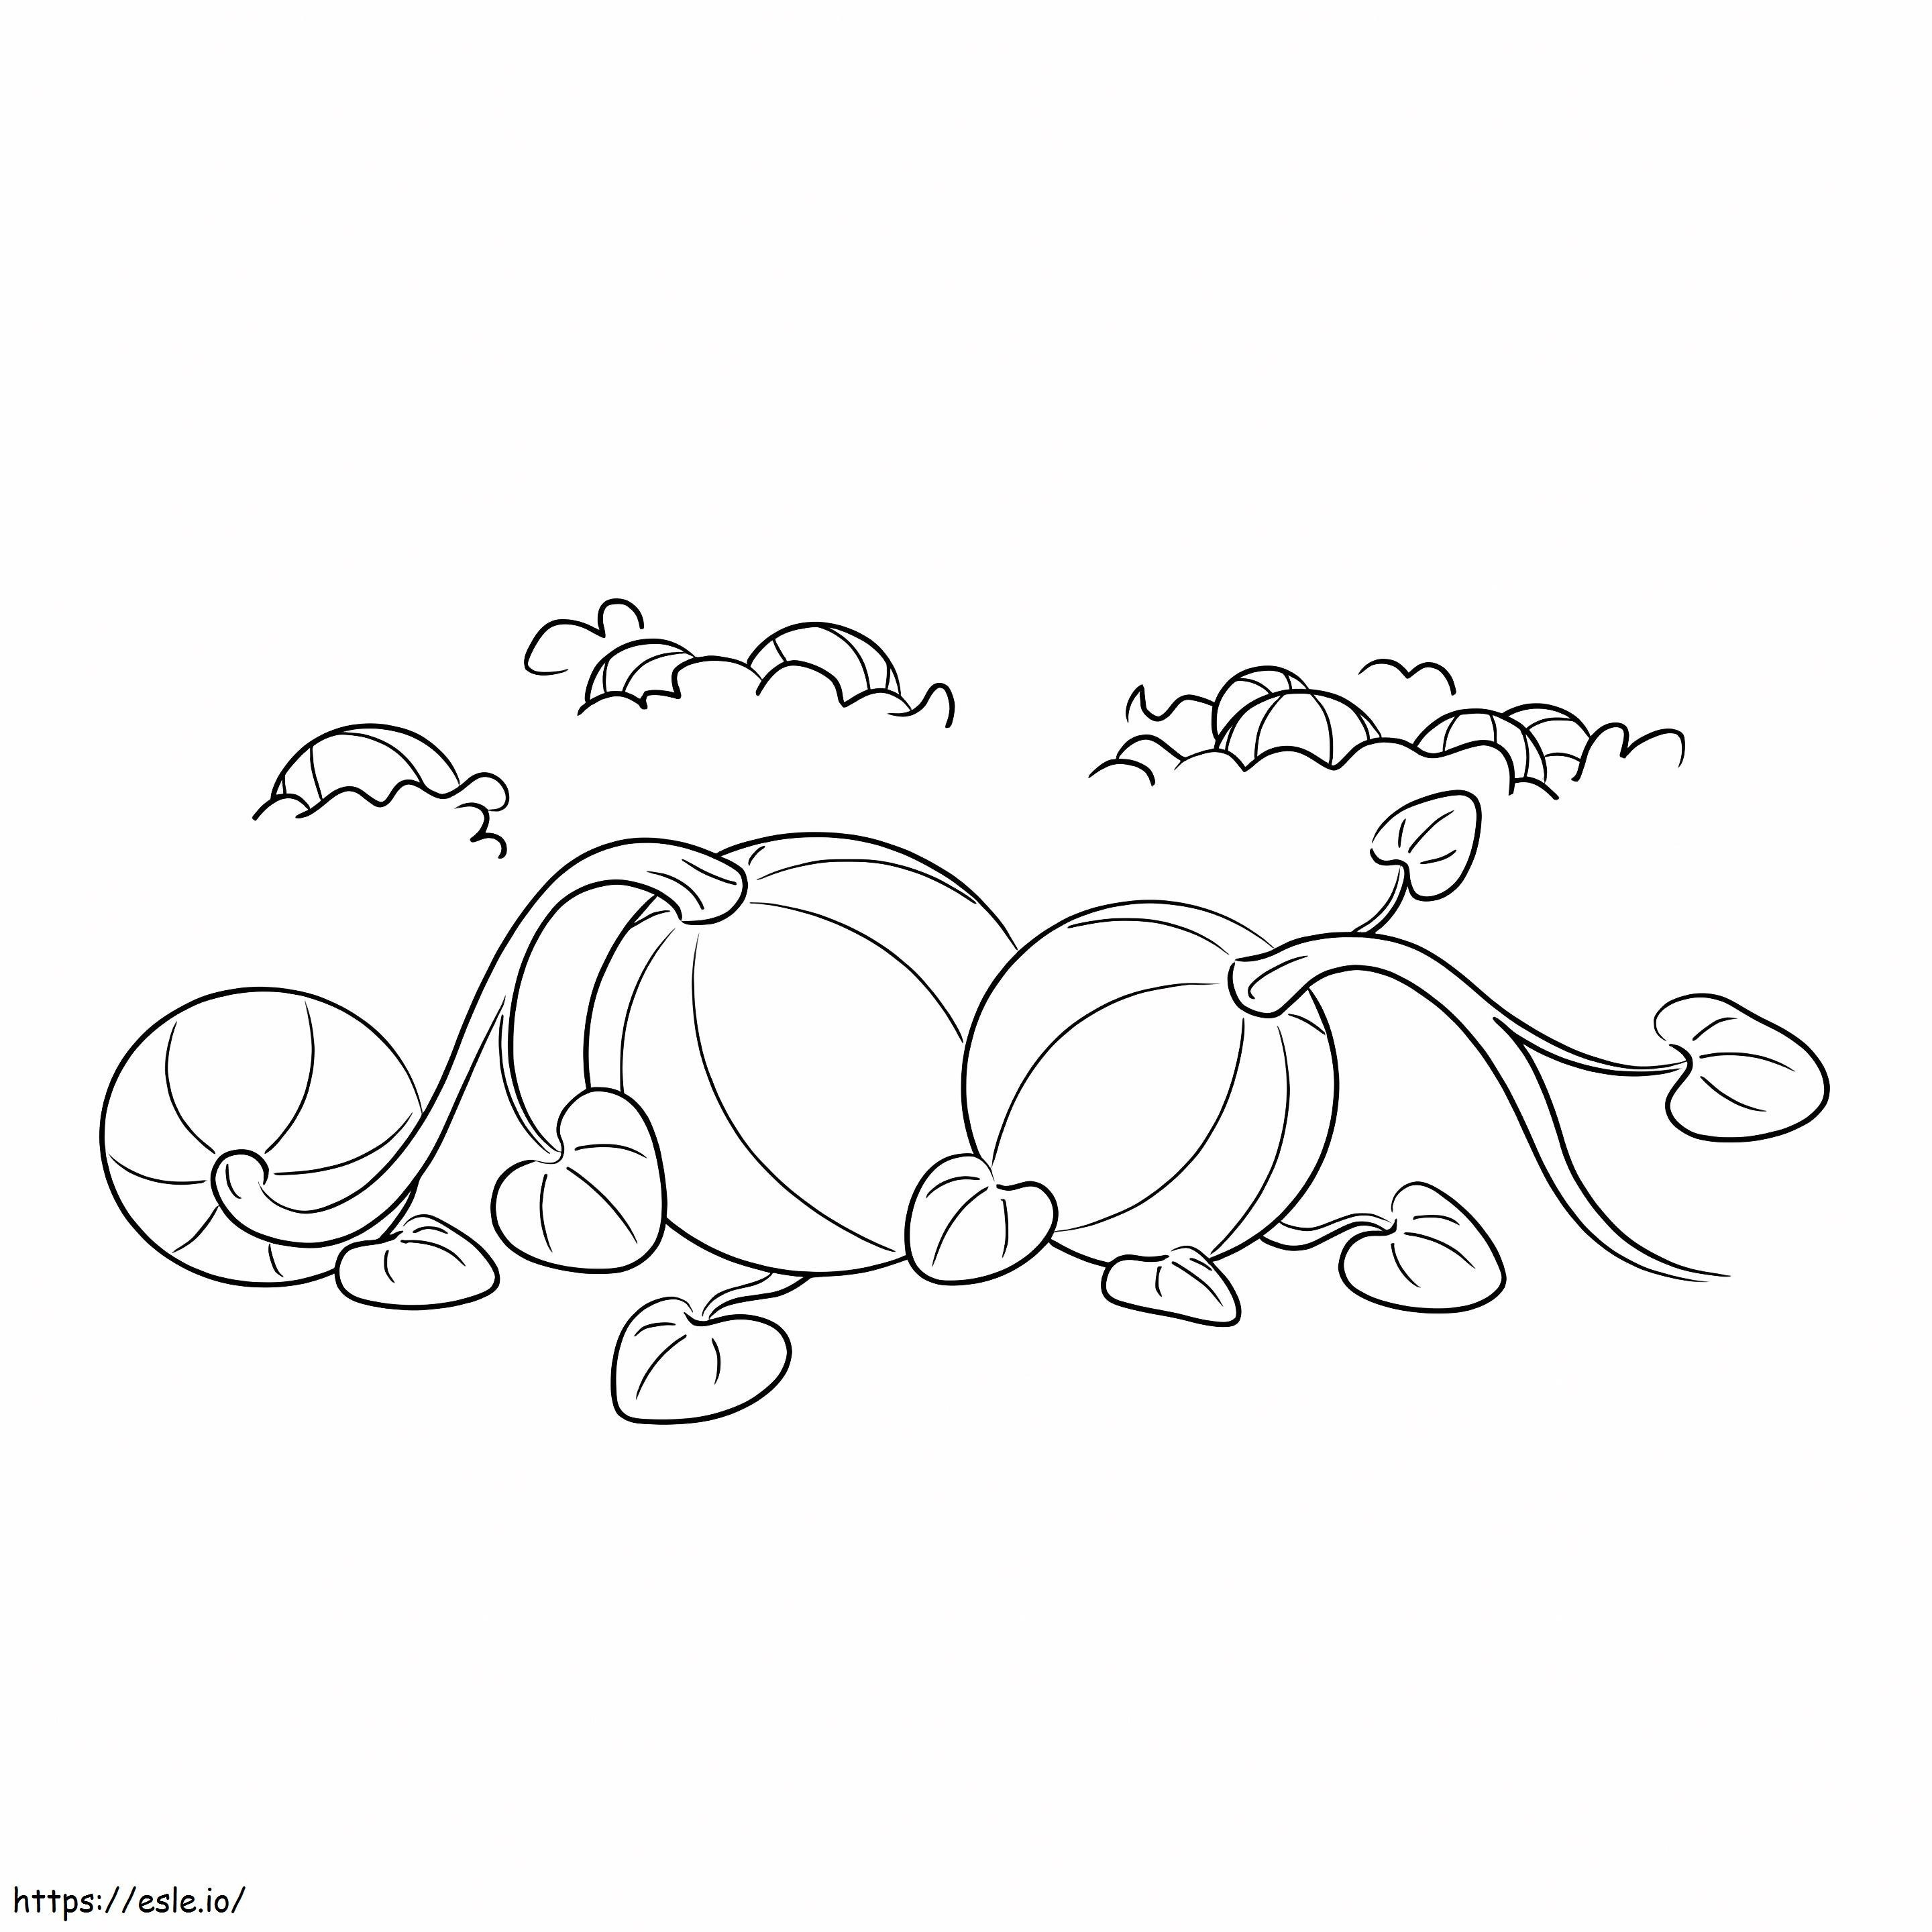 Harvest Day 1 coloring page